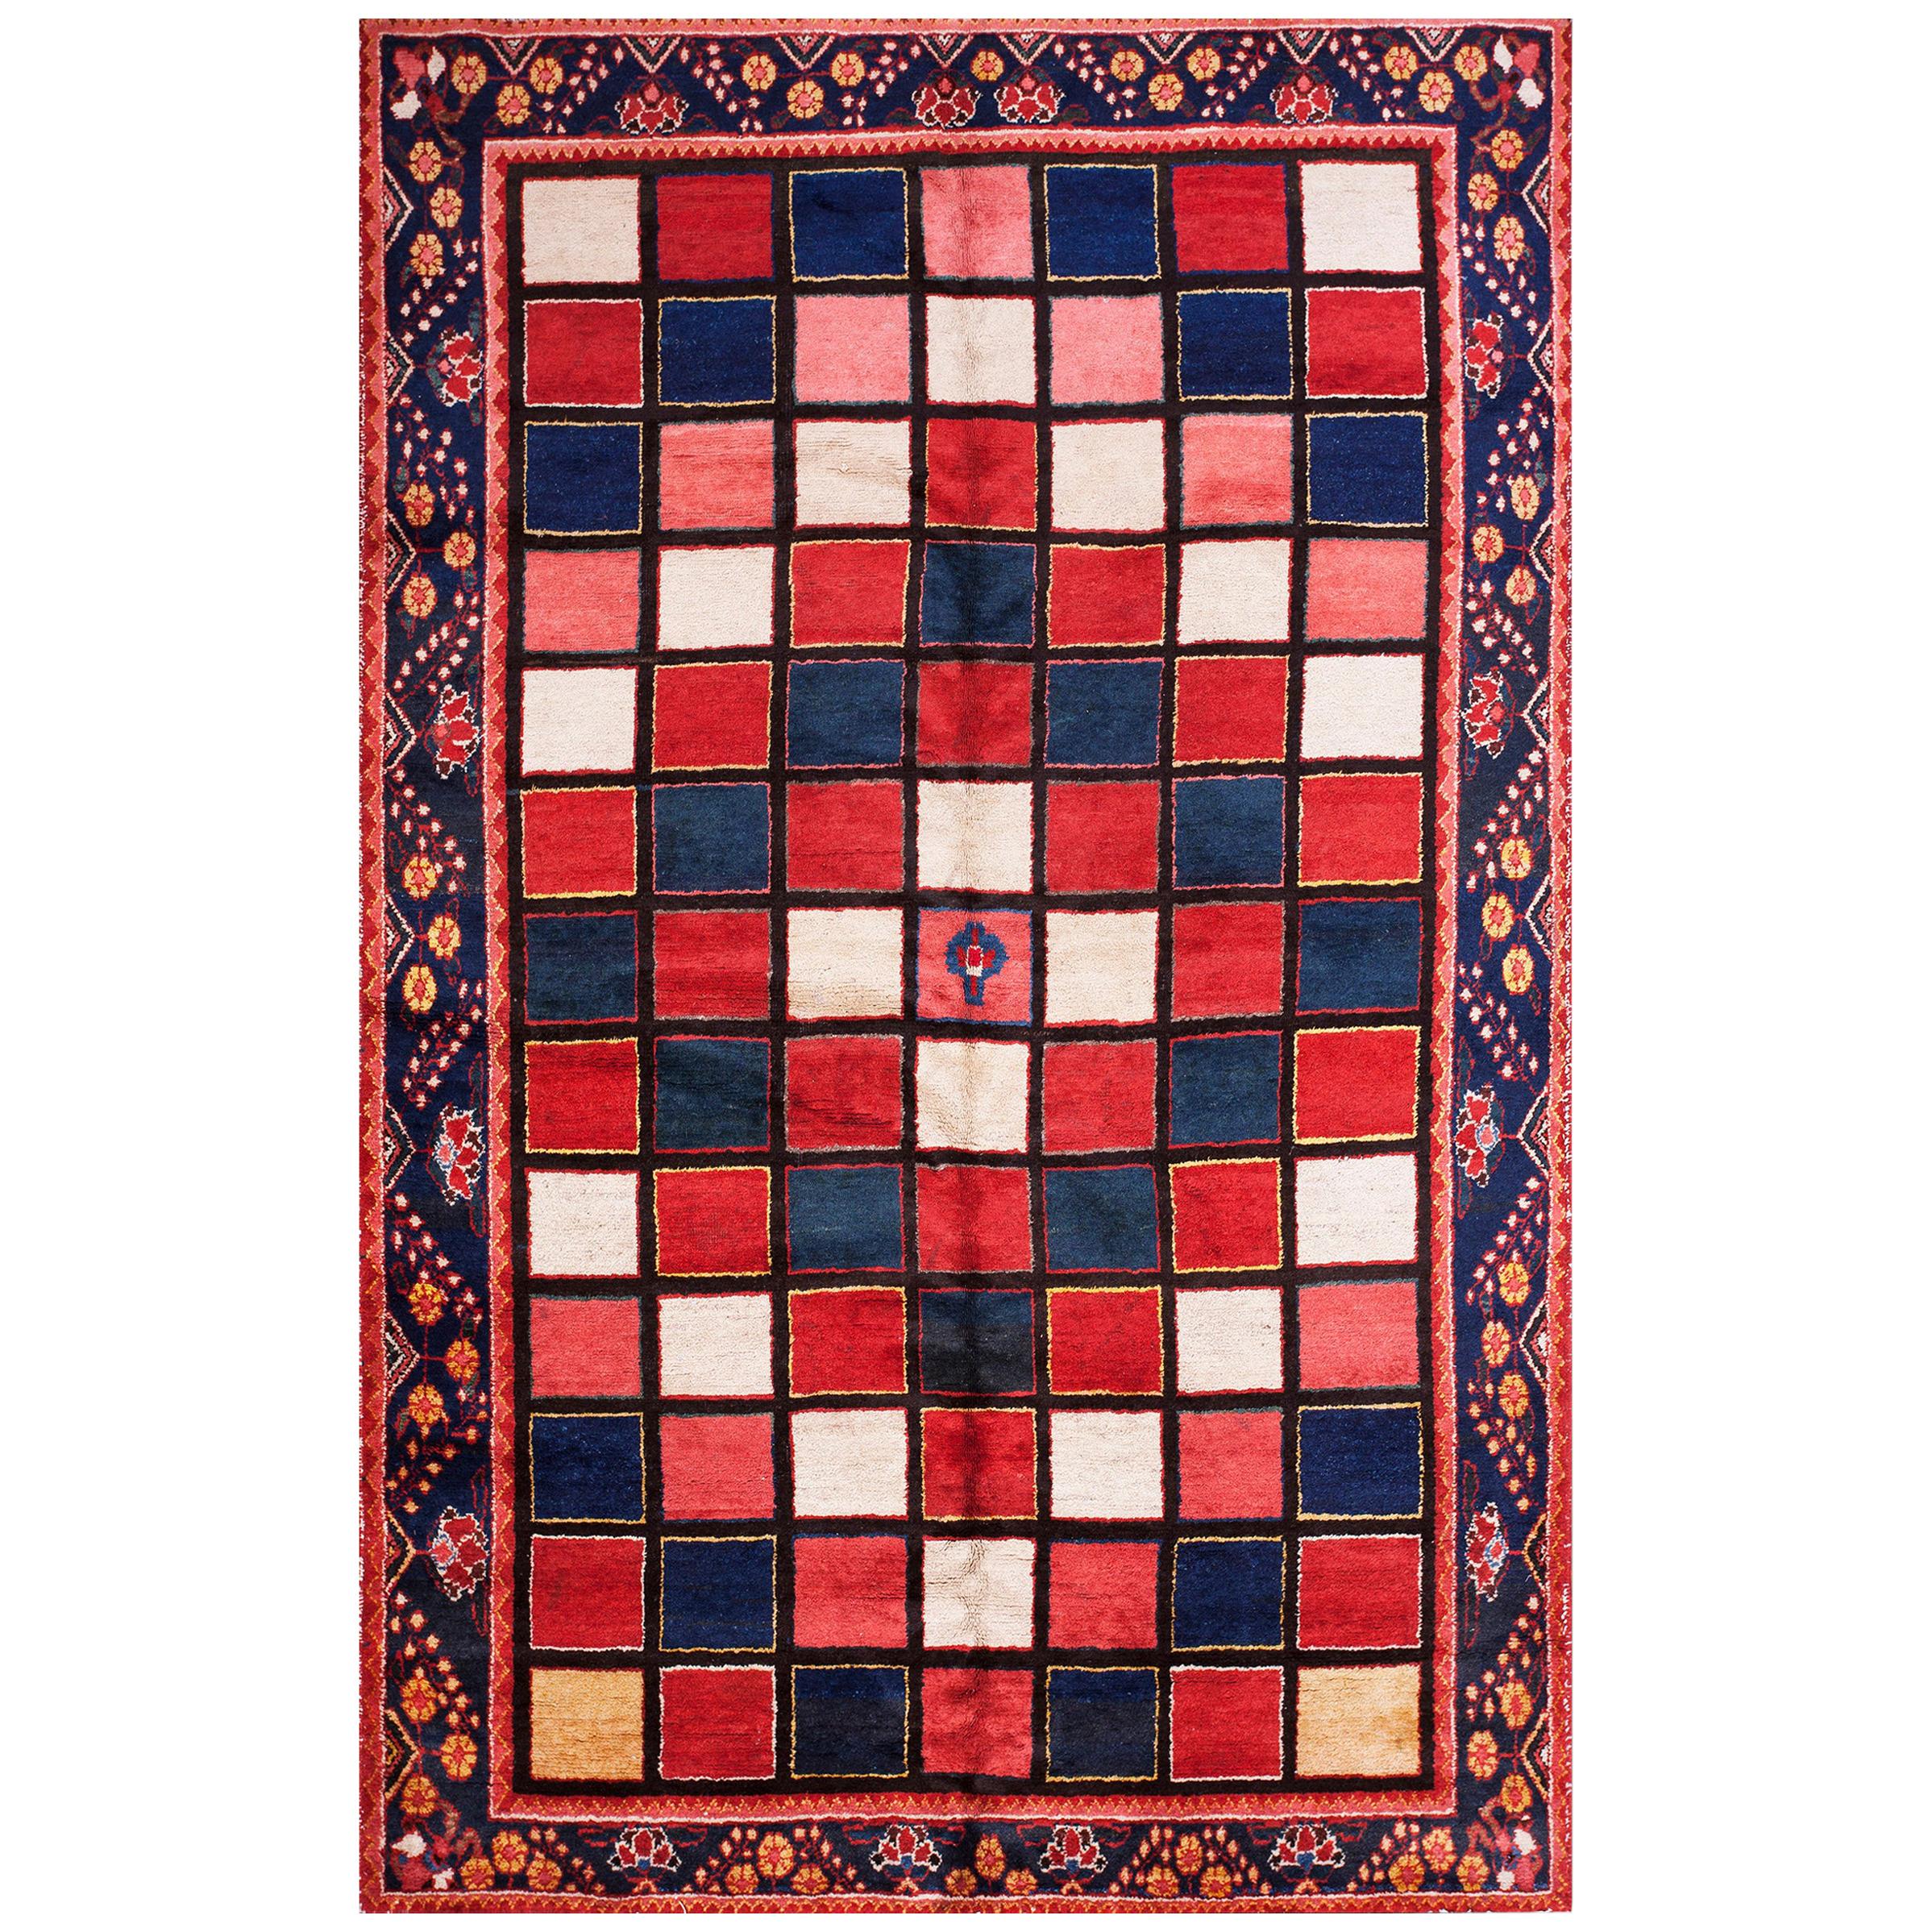 Early 20th Century S. Persian Gabbeh Carpet ( 6'8" x 10'2" - 203 x 310 ) For Sale